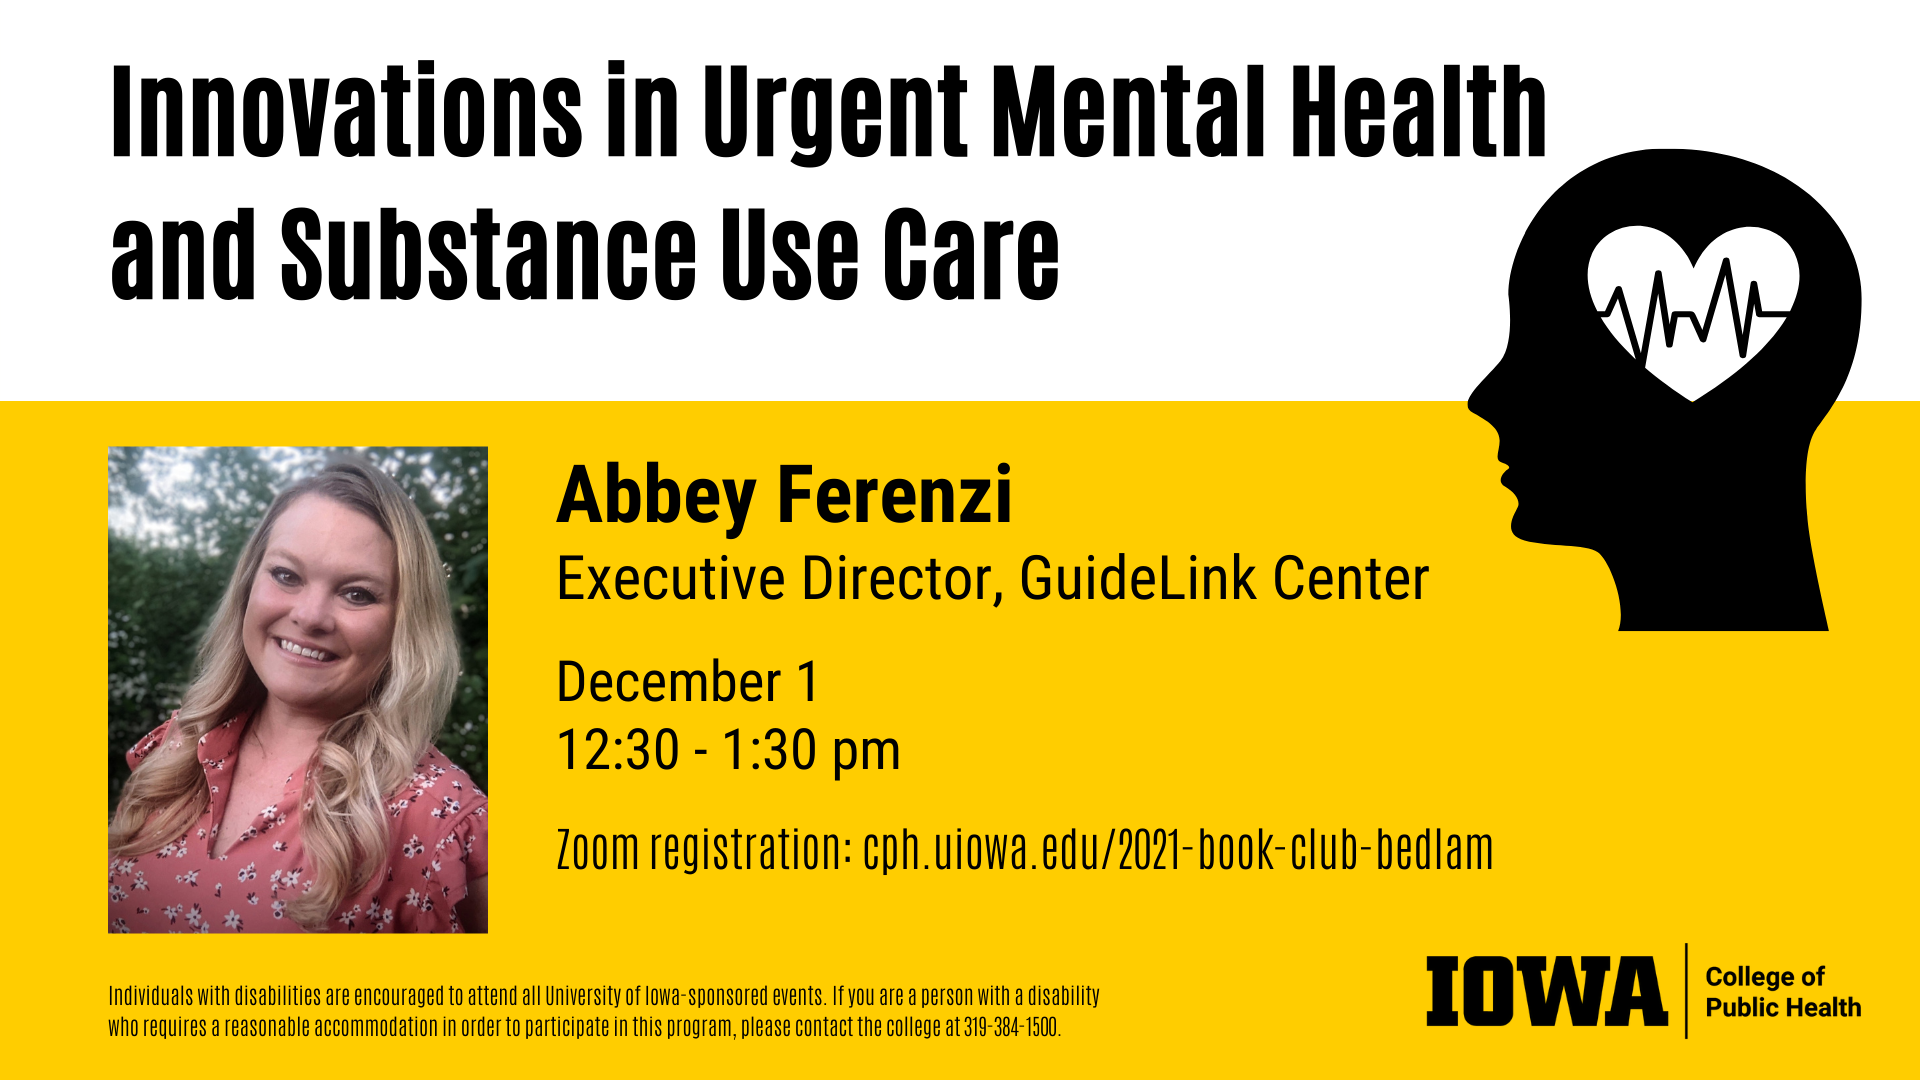 Innovations in urgent mental health and substance use care talk by the director of GuideLink Center